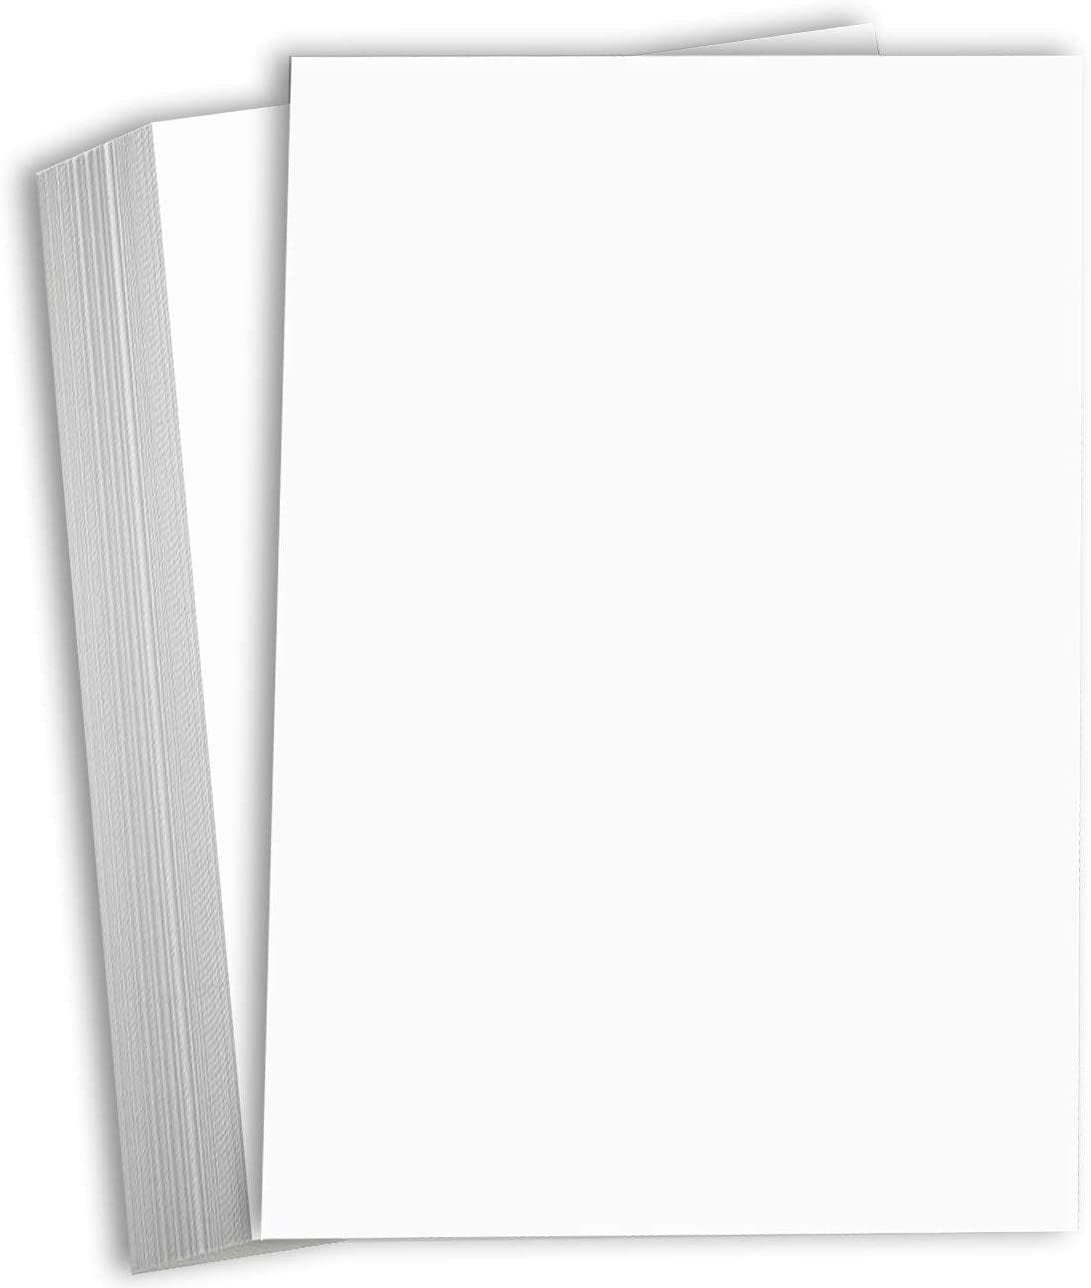 216 gsm Pack of 50 Sheets 80 lb 11 x 17 Ledger Size Smooth Cover White 